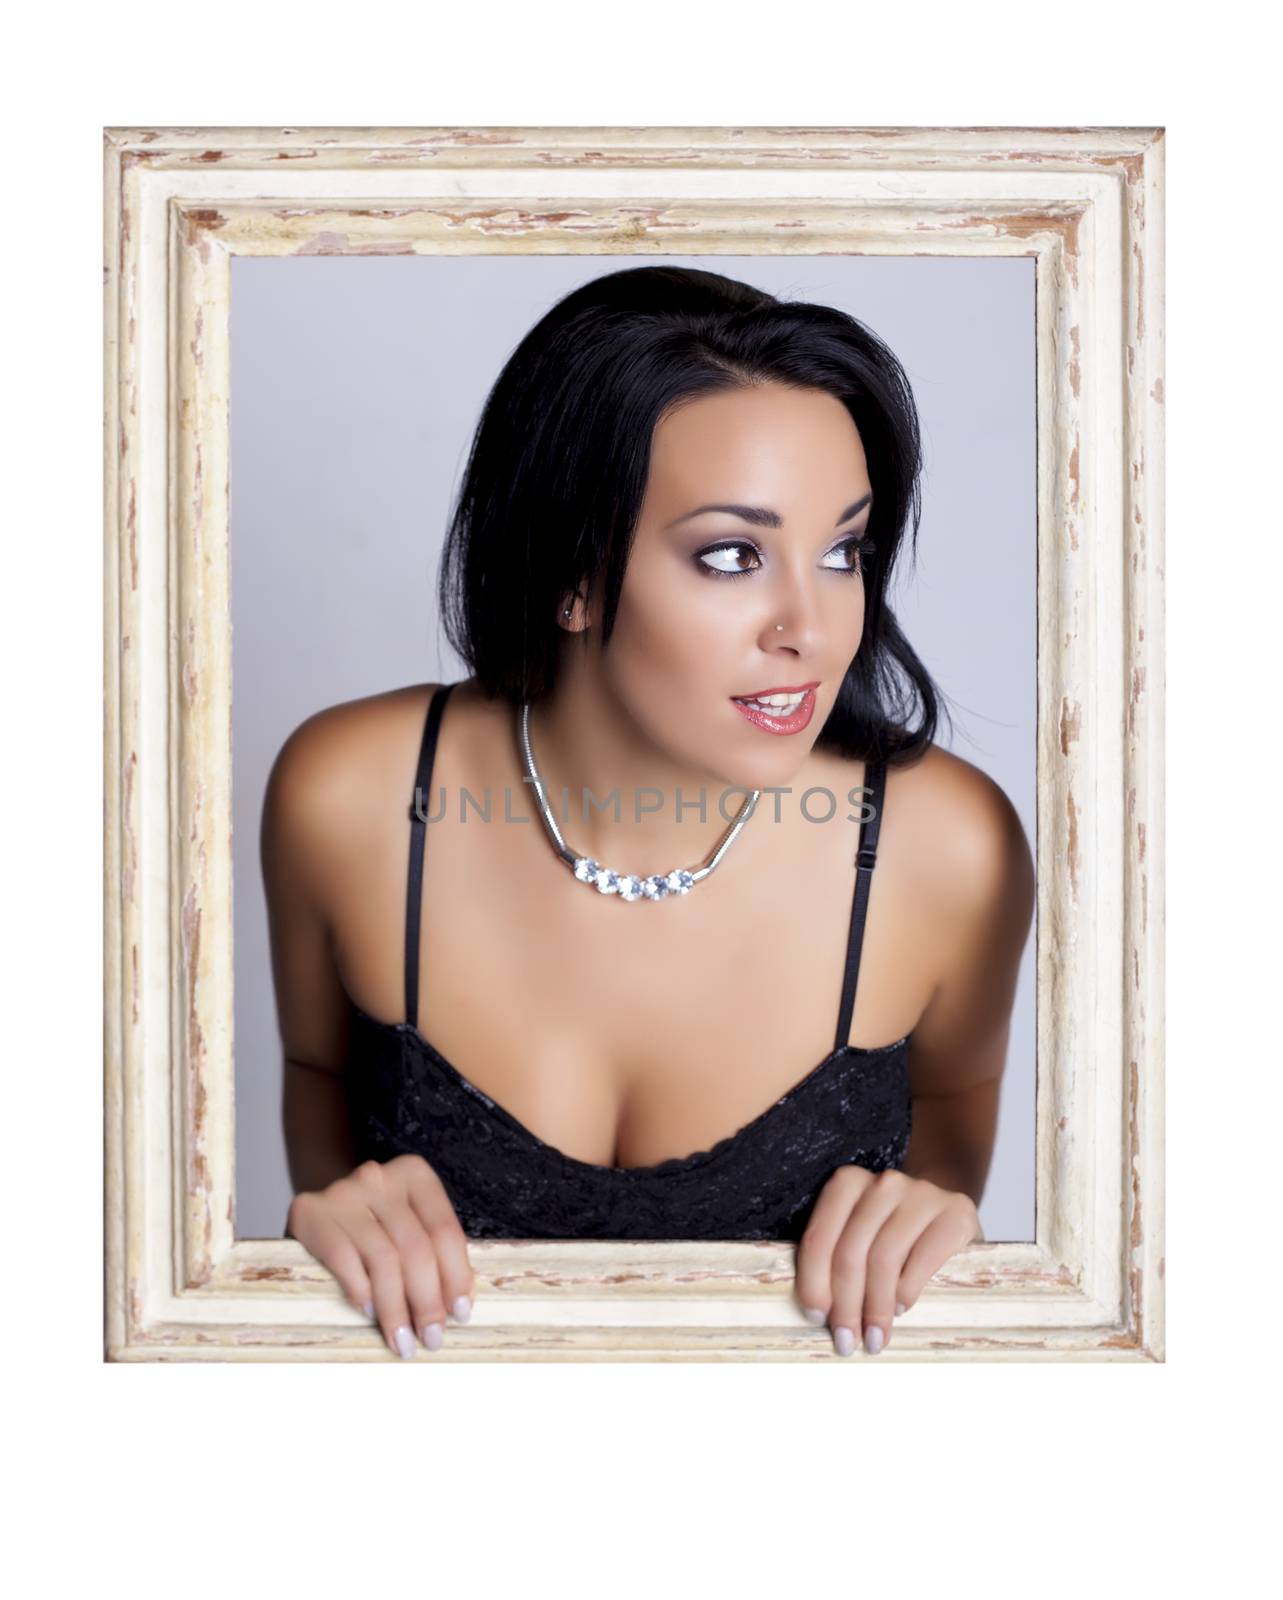 Abstract image of a beautiful woman trapped in a picture frame.